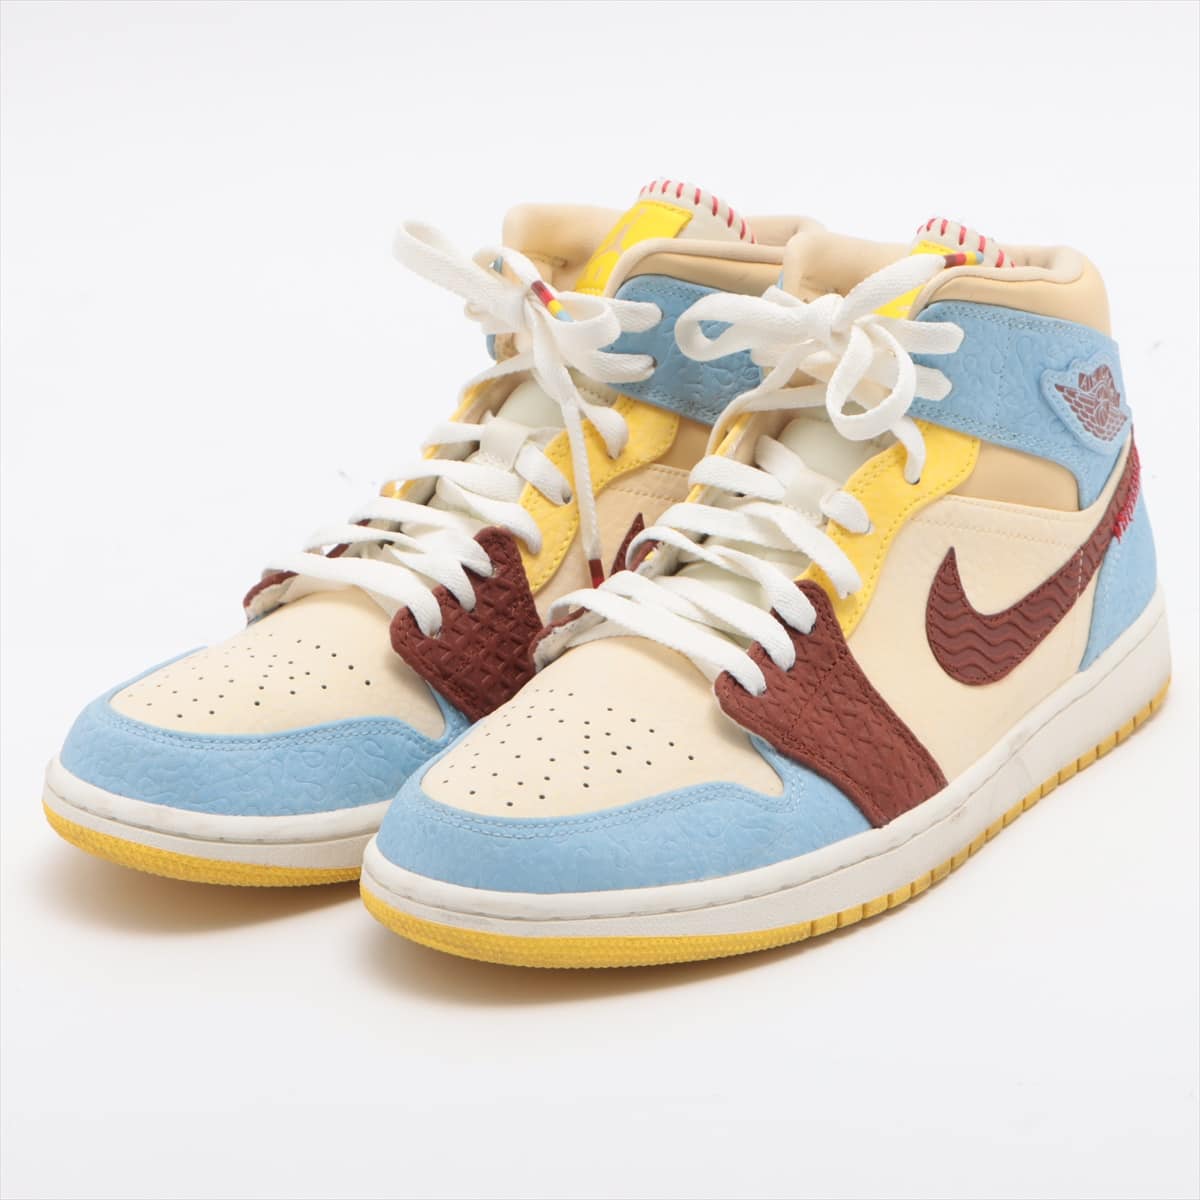 Nike x Maison Chateau Rouge AIR JORDAN 1 MID 19-year Leather High-top Sneakers 28cm Men's Multicolor CU2803-200 Fearless Ones Collection